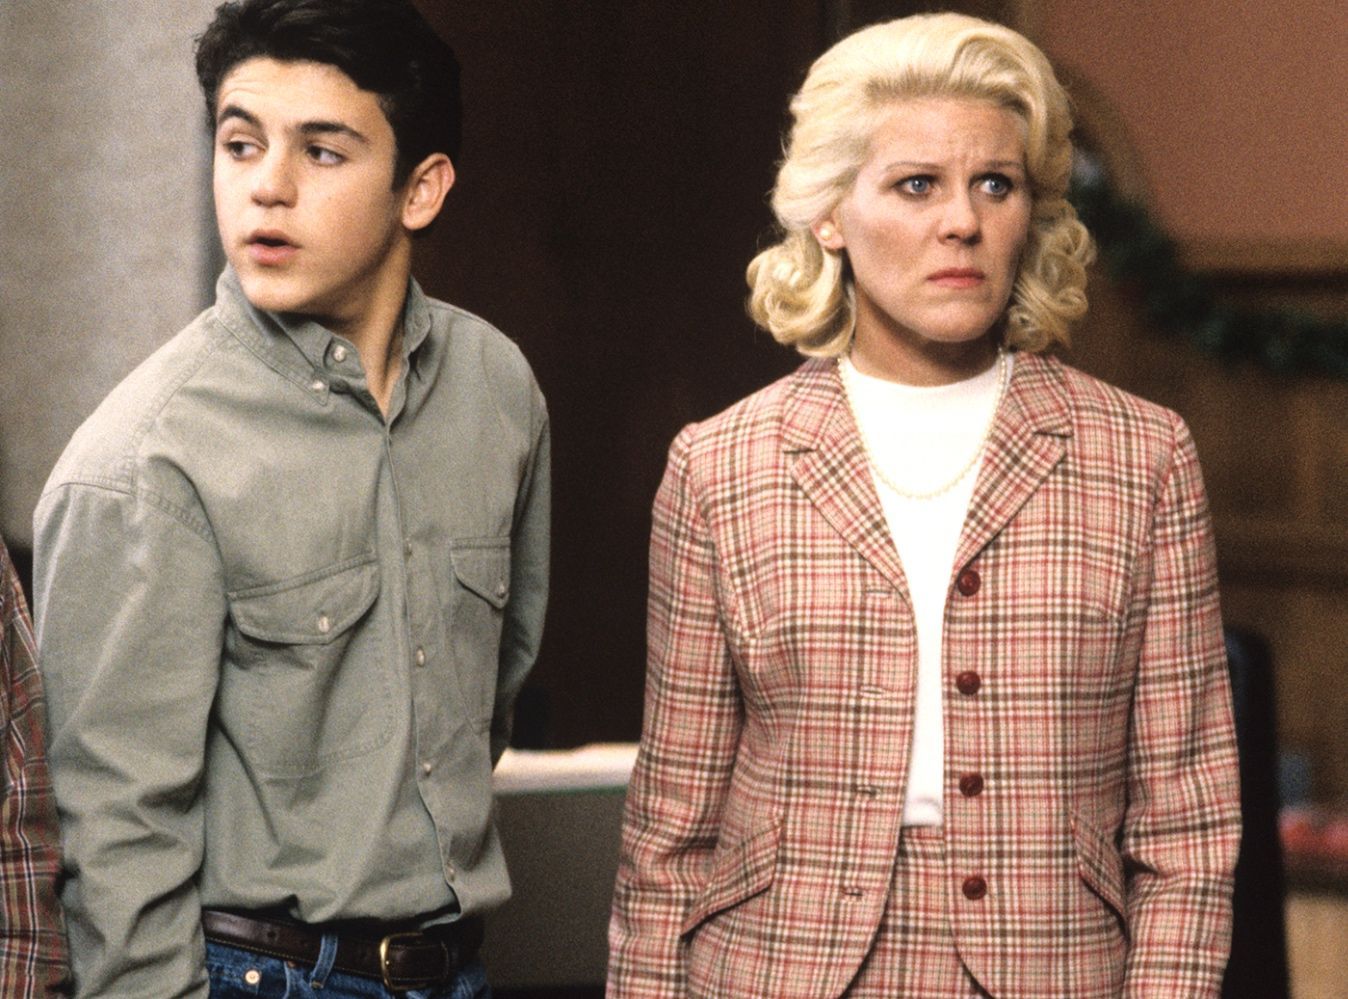 The Truth Behind The Scandal That Led To 'The Wonder Years' Cancellation